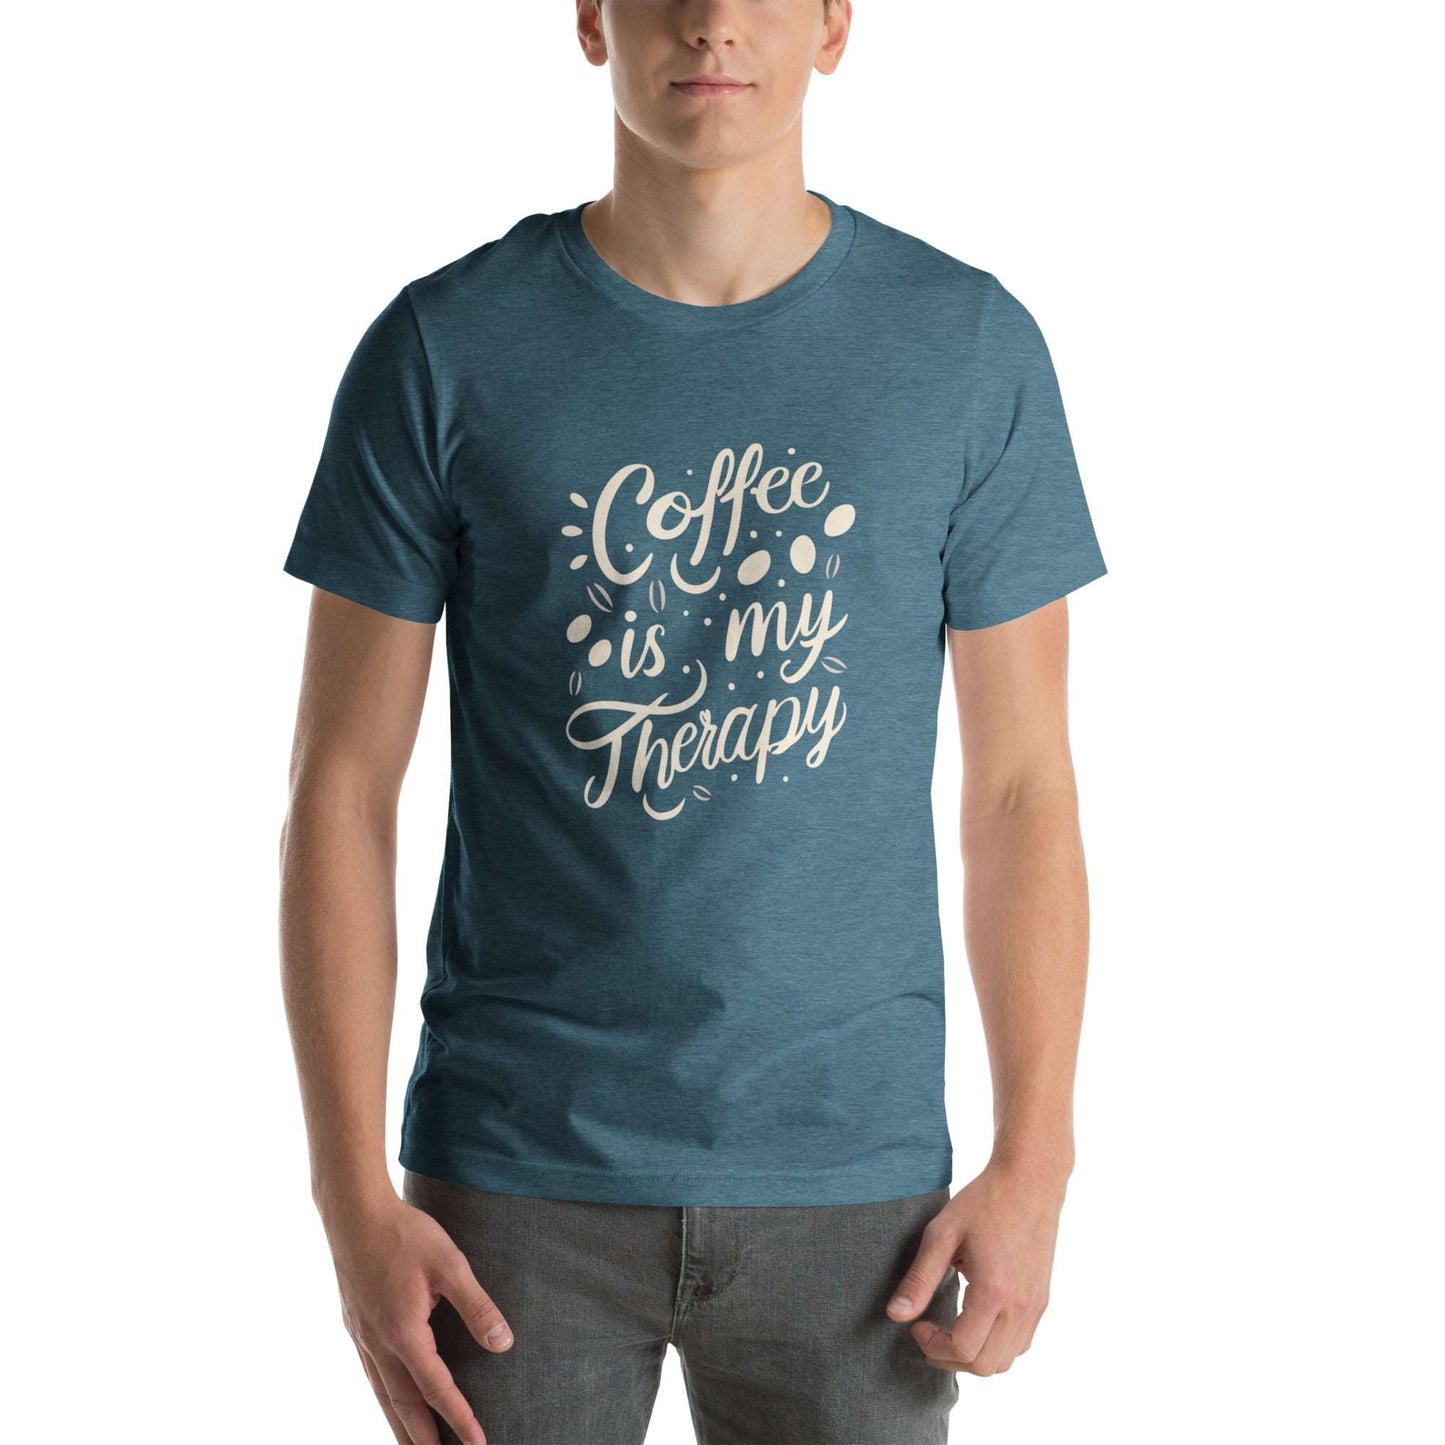 COFFEE IS MY THERAPY - Unisex t-shirt